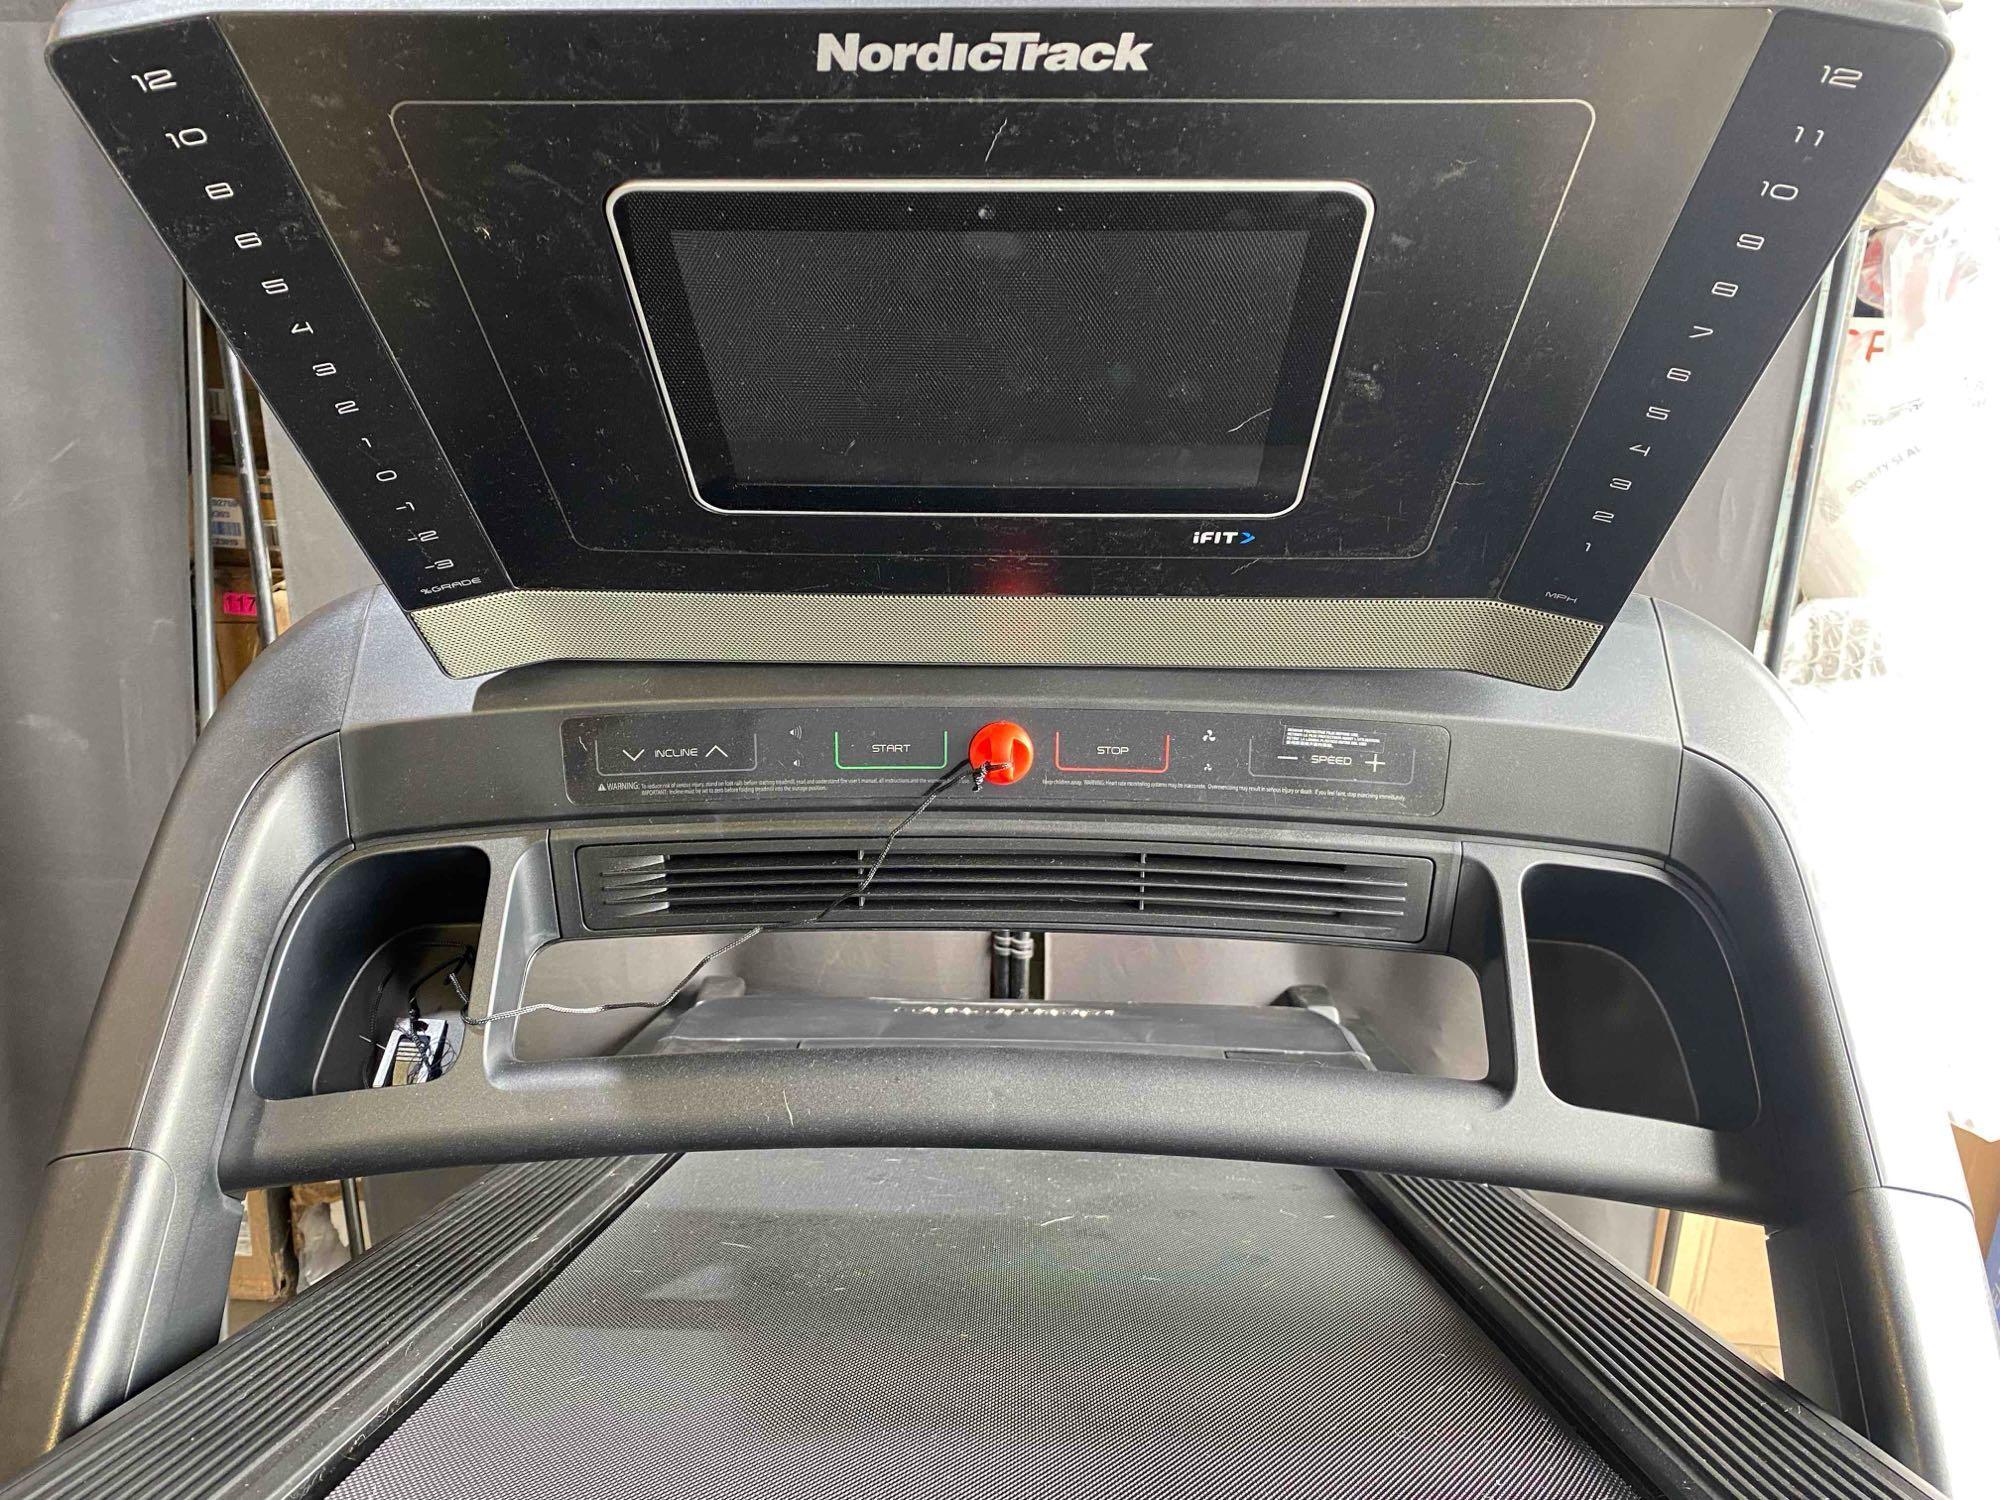 NORDICTRACK Commercial 1250 Foldable iFit-enabled Treadmill with Incline Adjustment